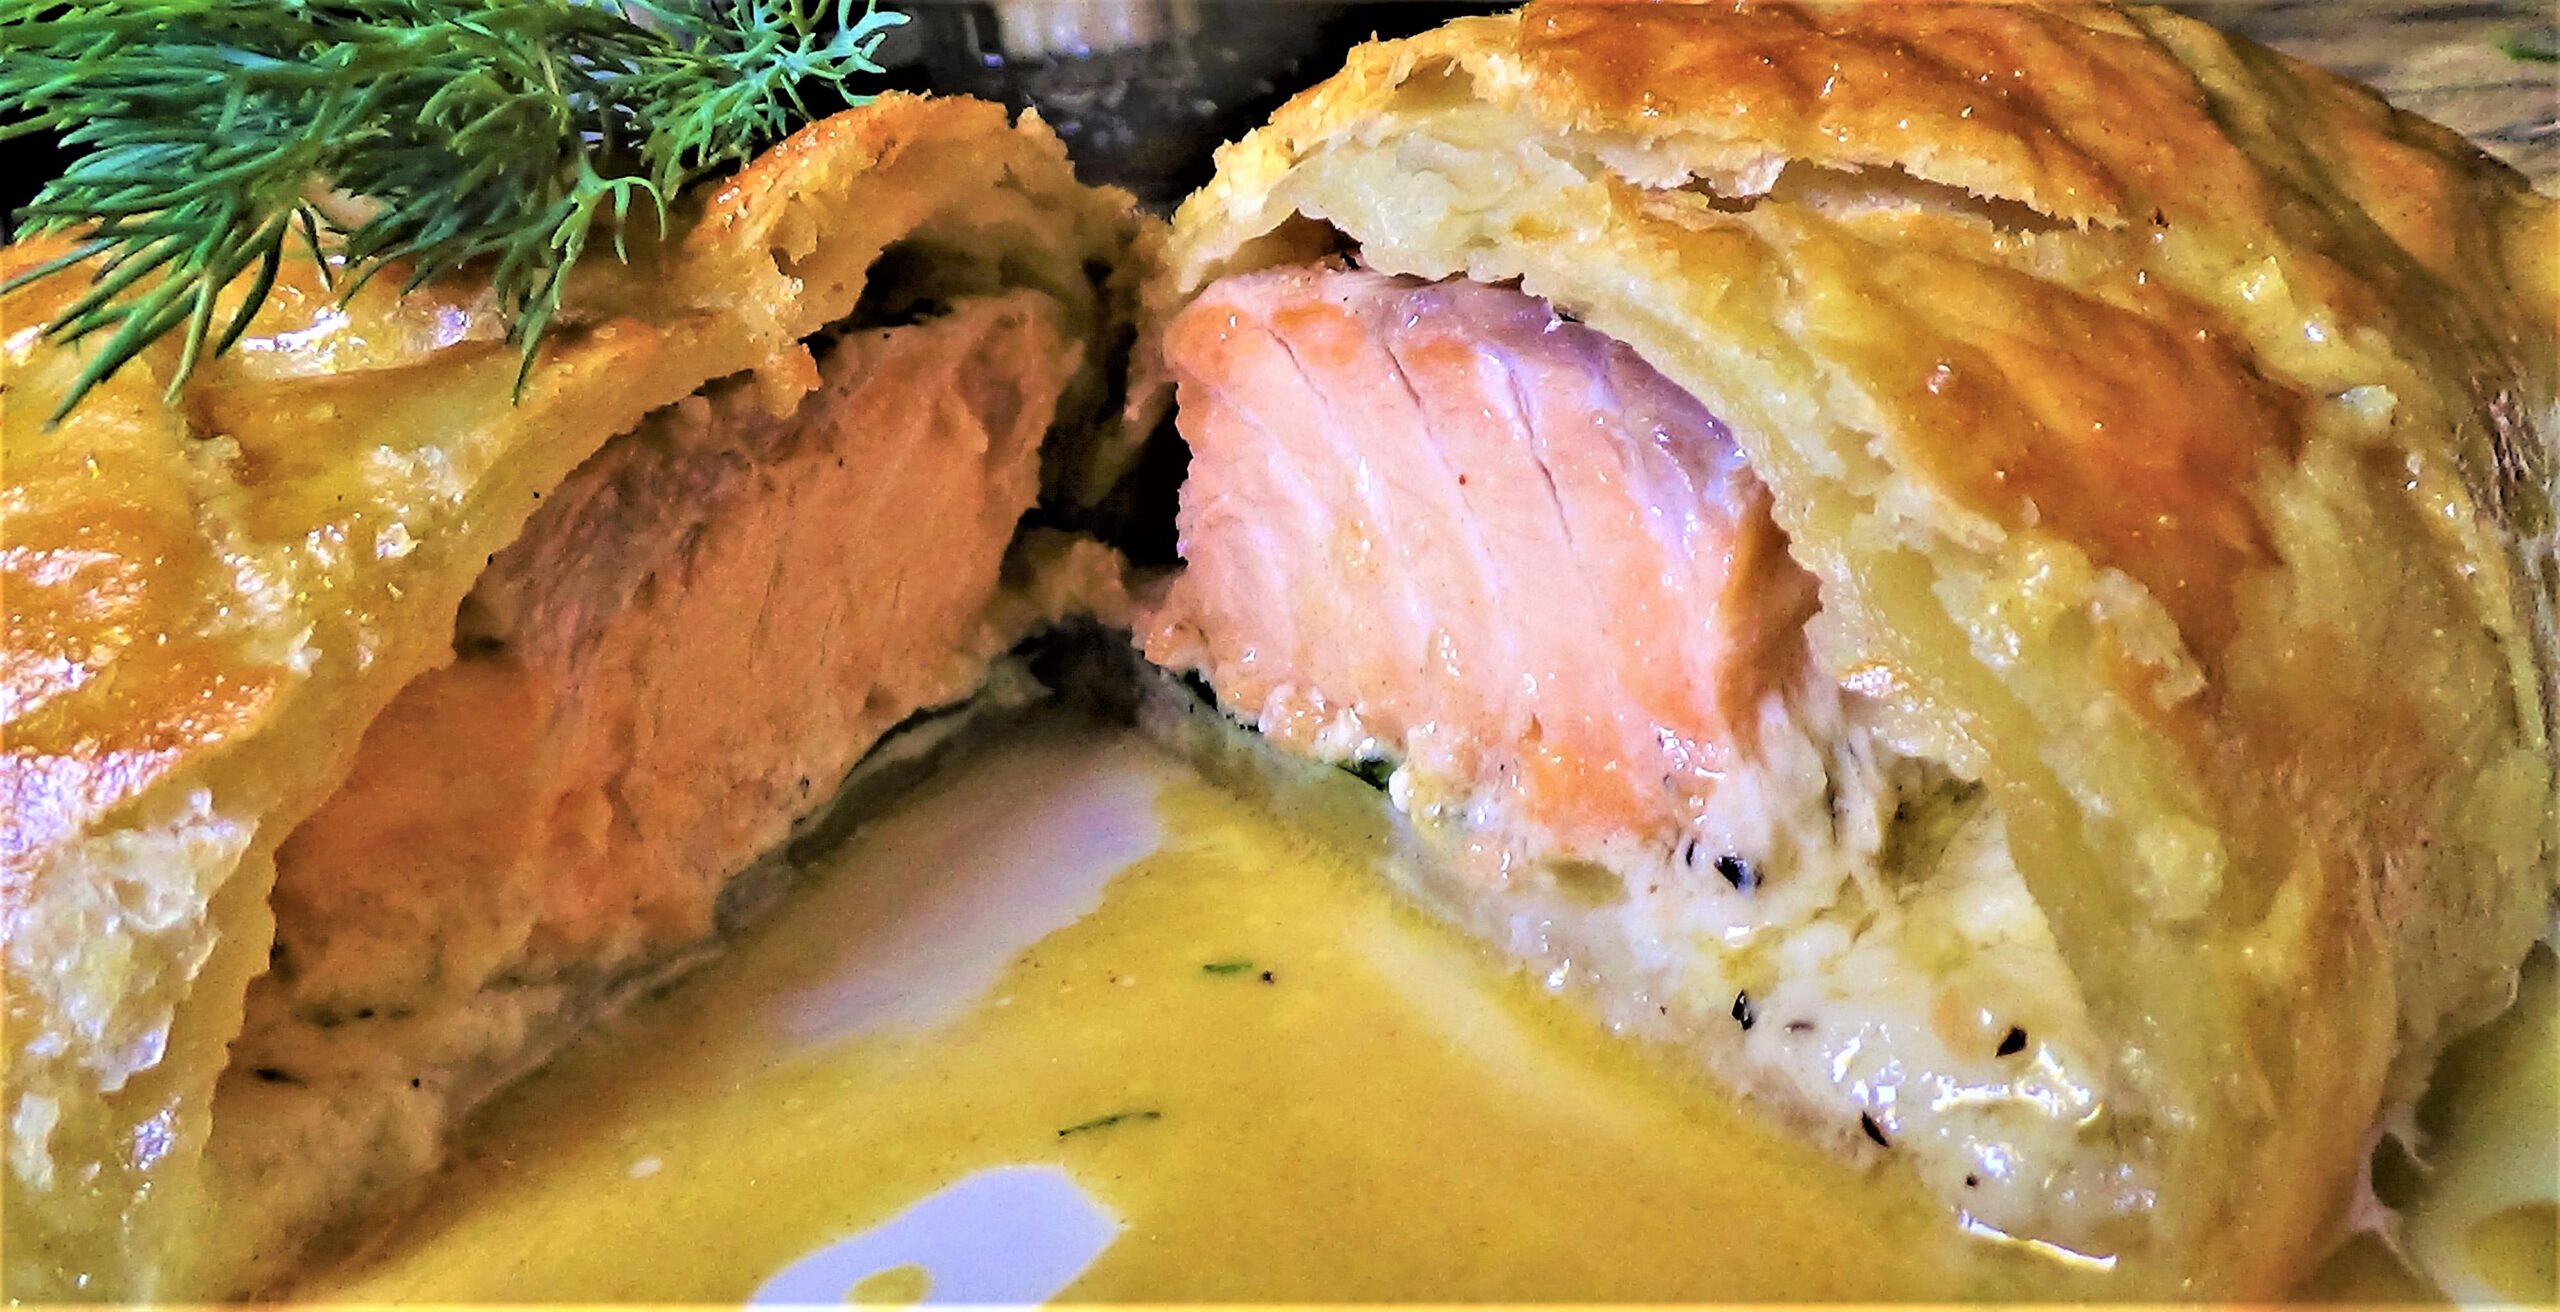  The crispy texture is a perfect contrast to the melt-in-your-mouth salmon!